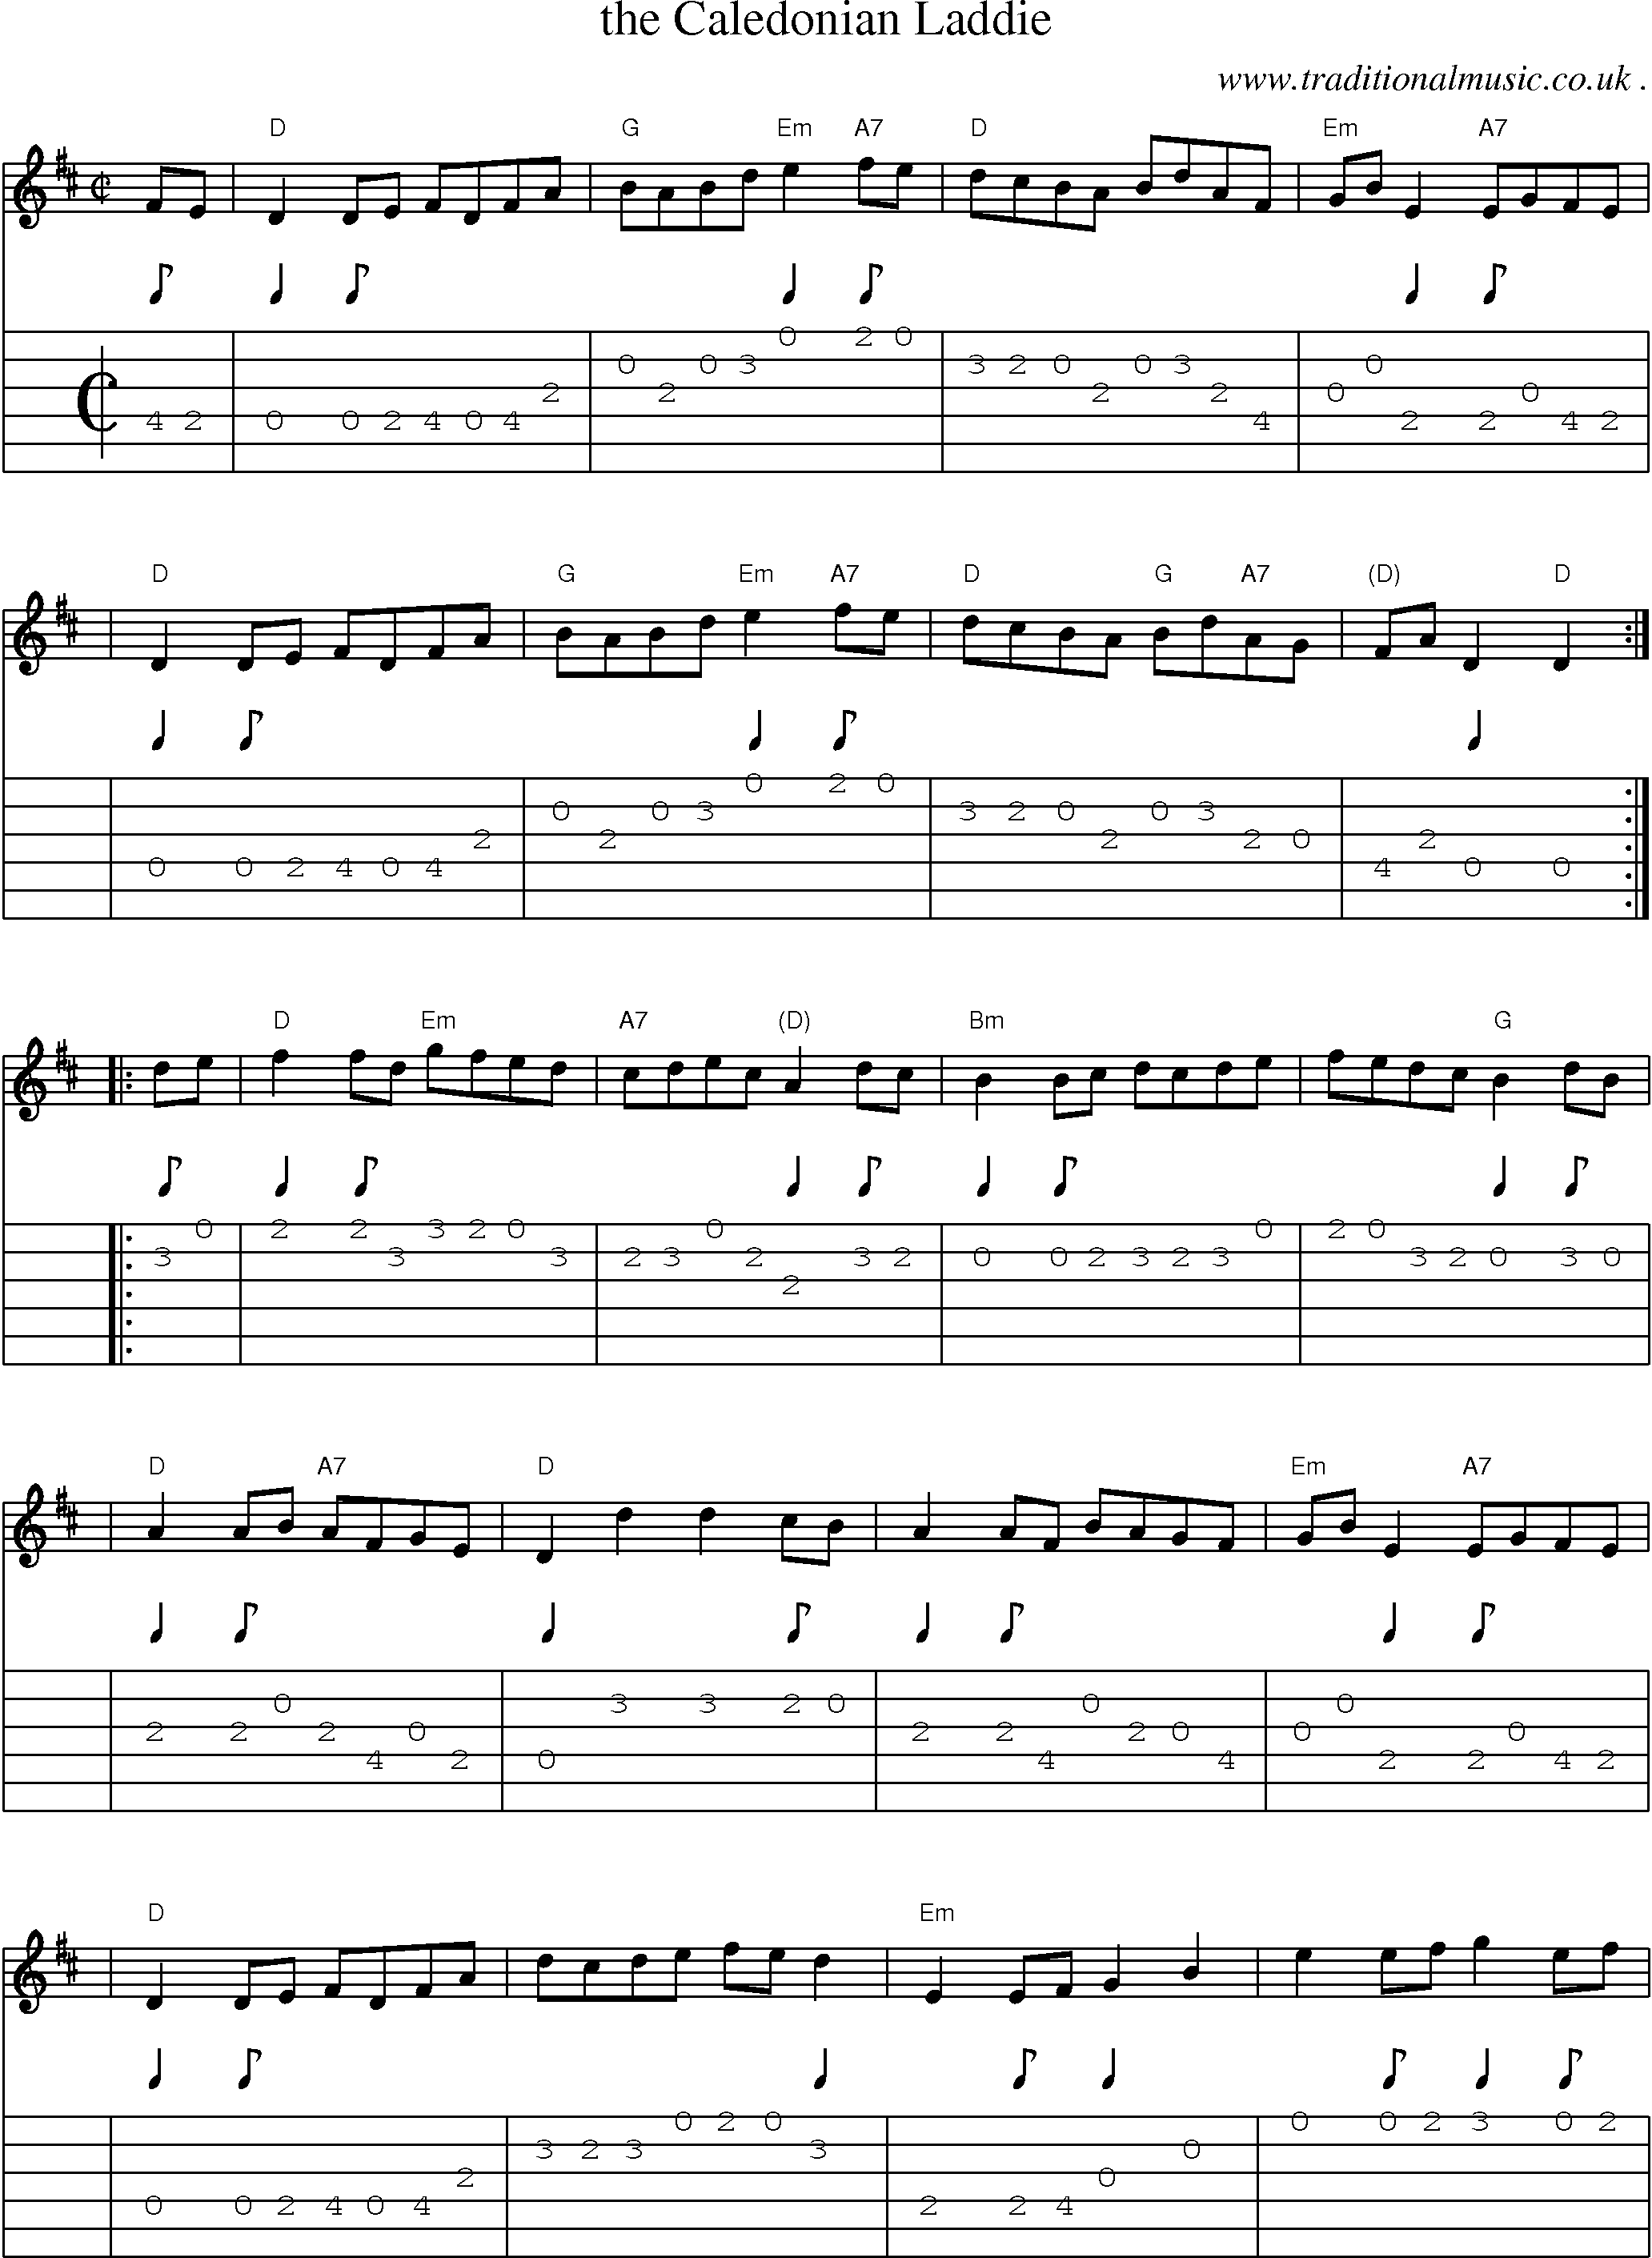 Sheet-music  score, Chords and Guitar Tabs for The Caledonian Laddie